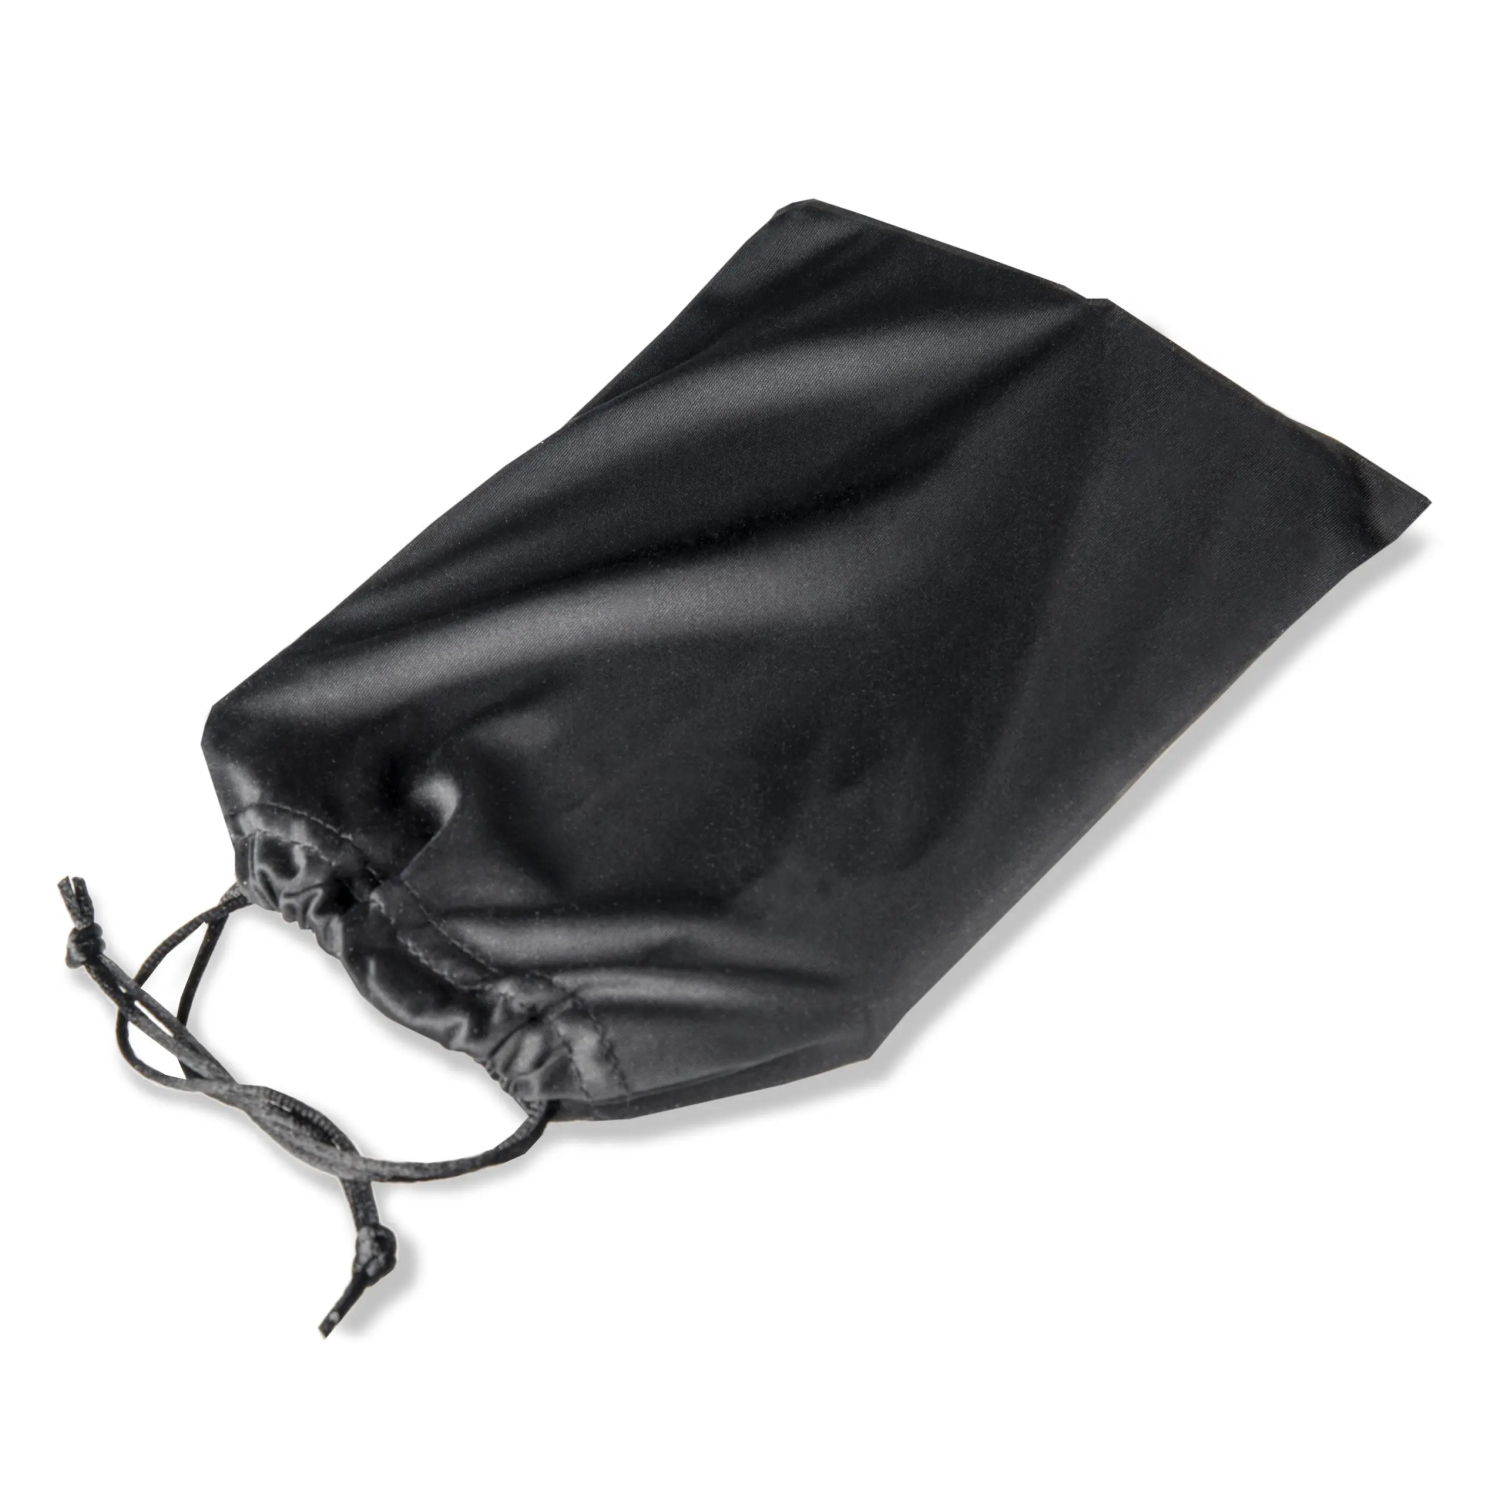 Image of the protective pouch that the booklight comes with.